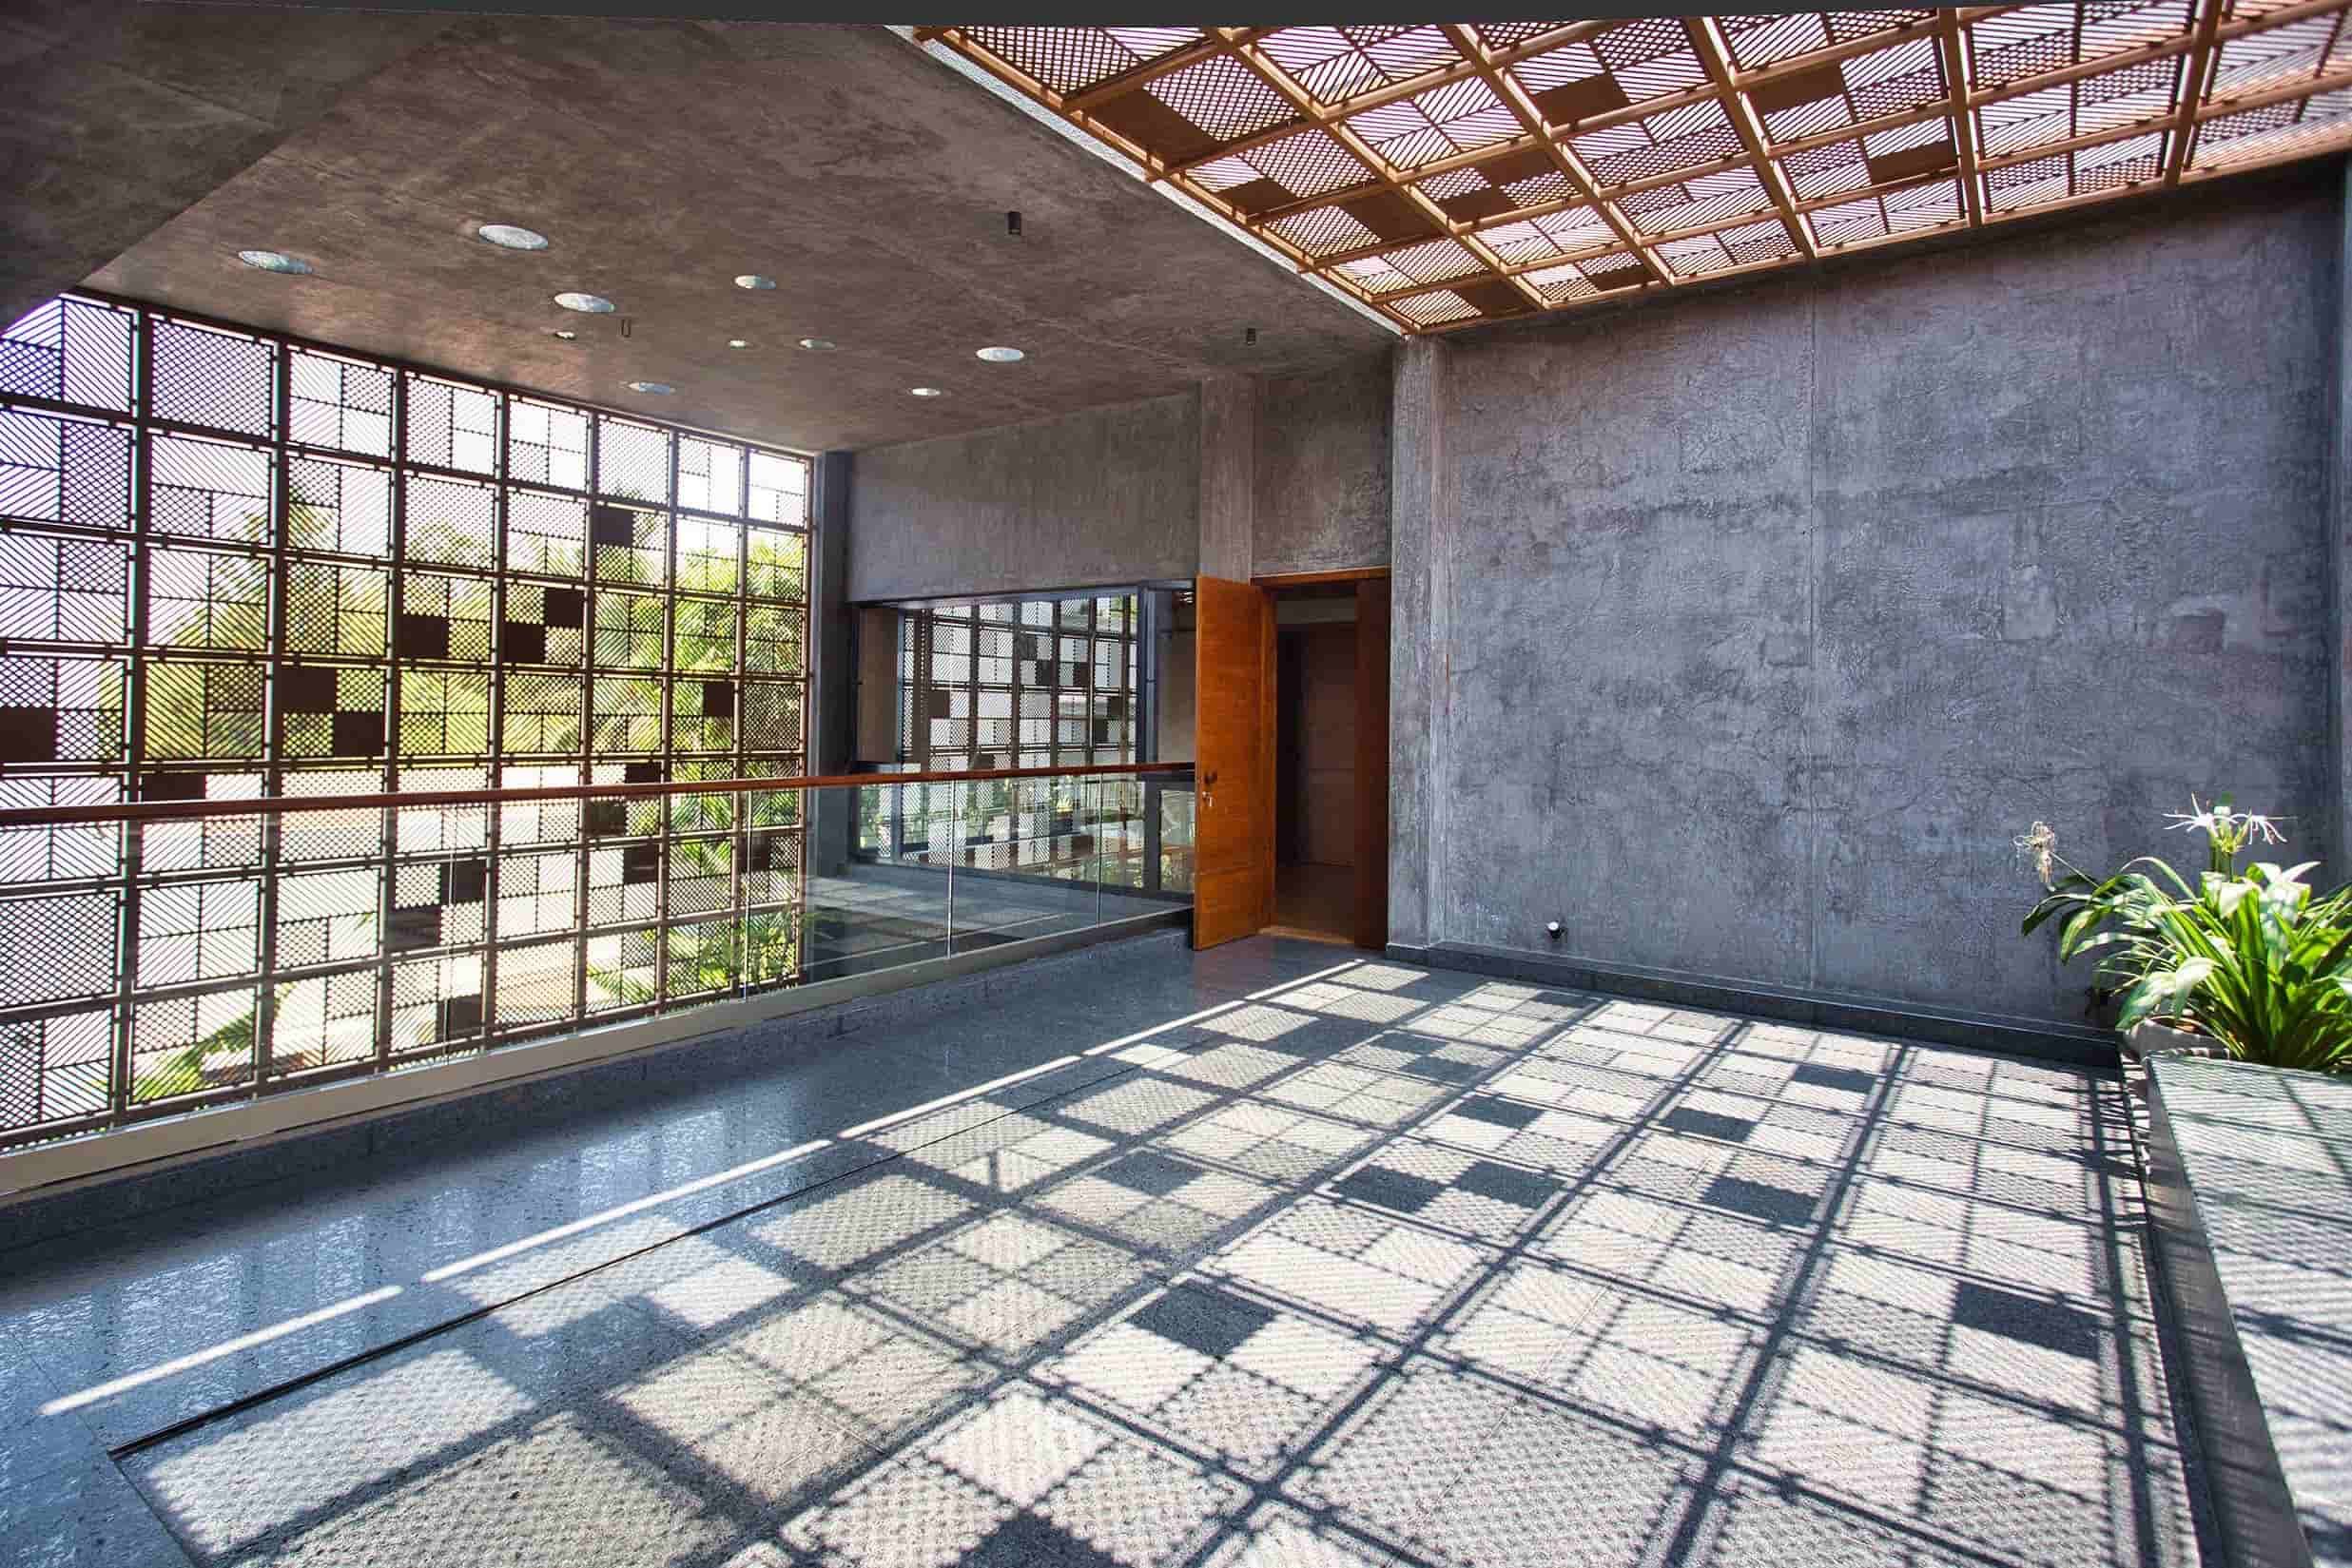 The upper floor deck with the sunlight filtering in from the top and front permeable screens